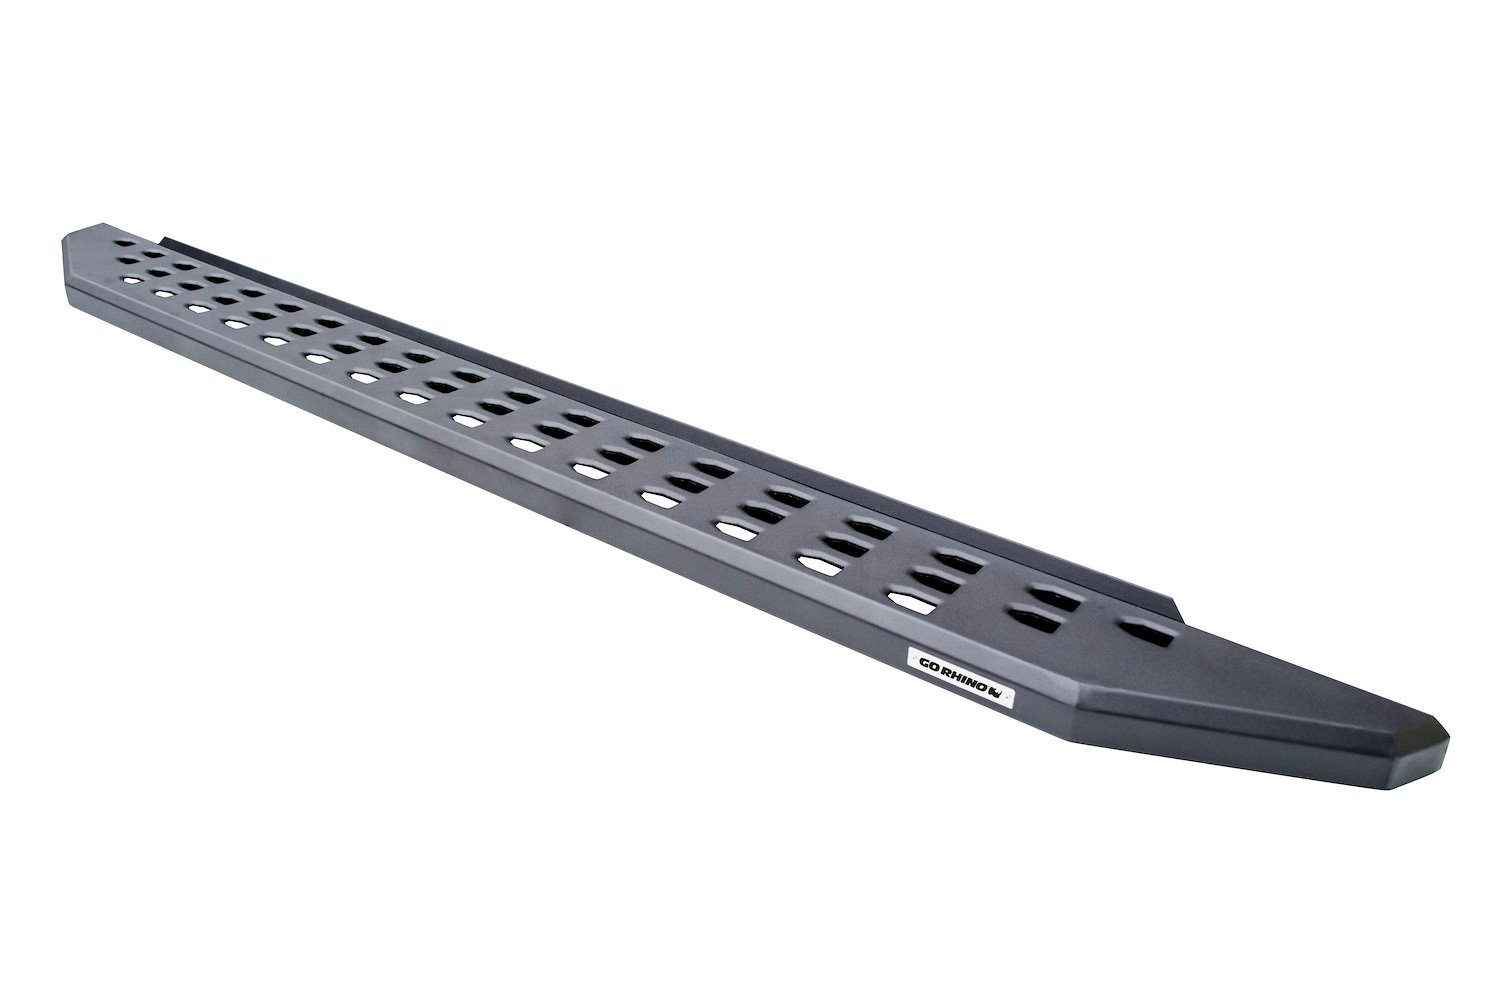 RB20 Running boards for 2004-2014 Ford F-150